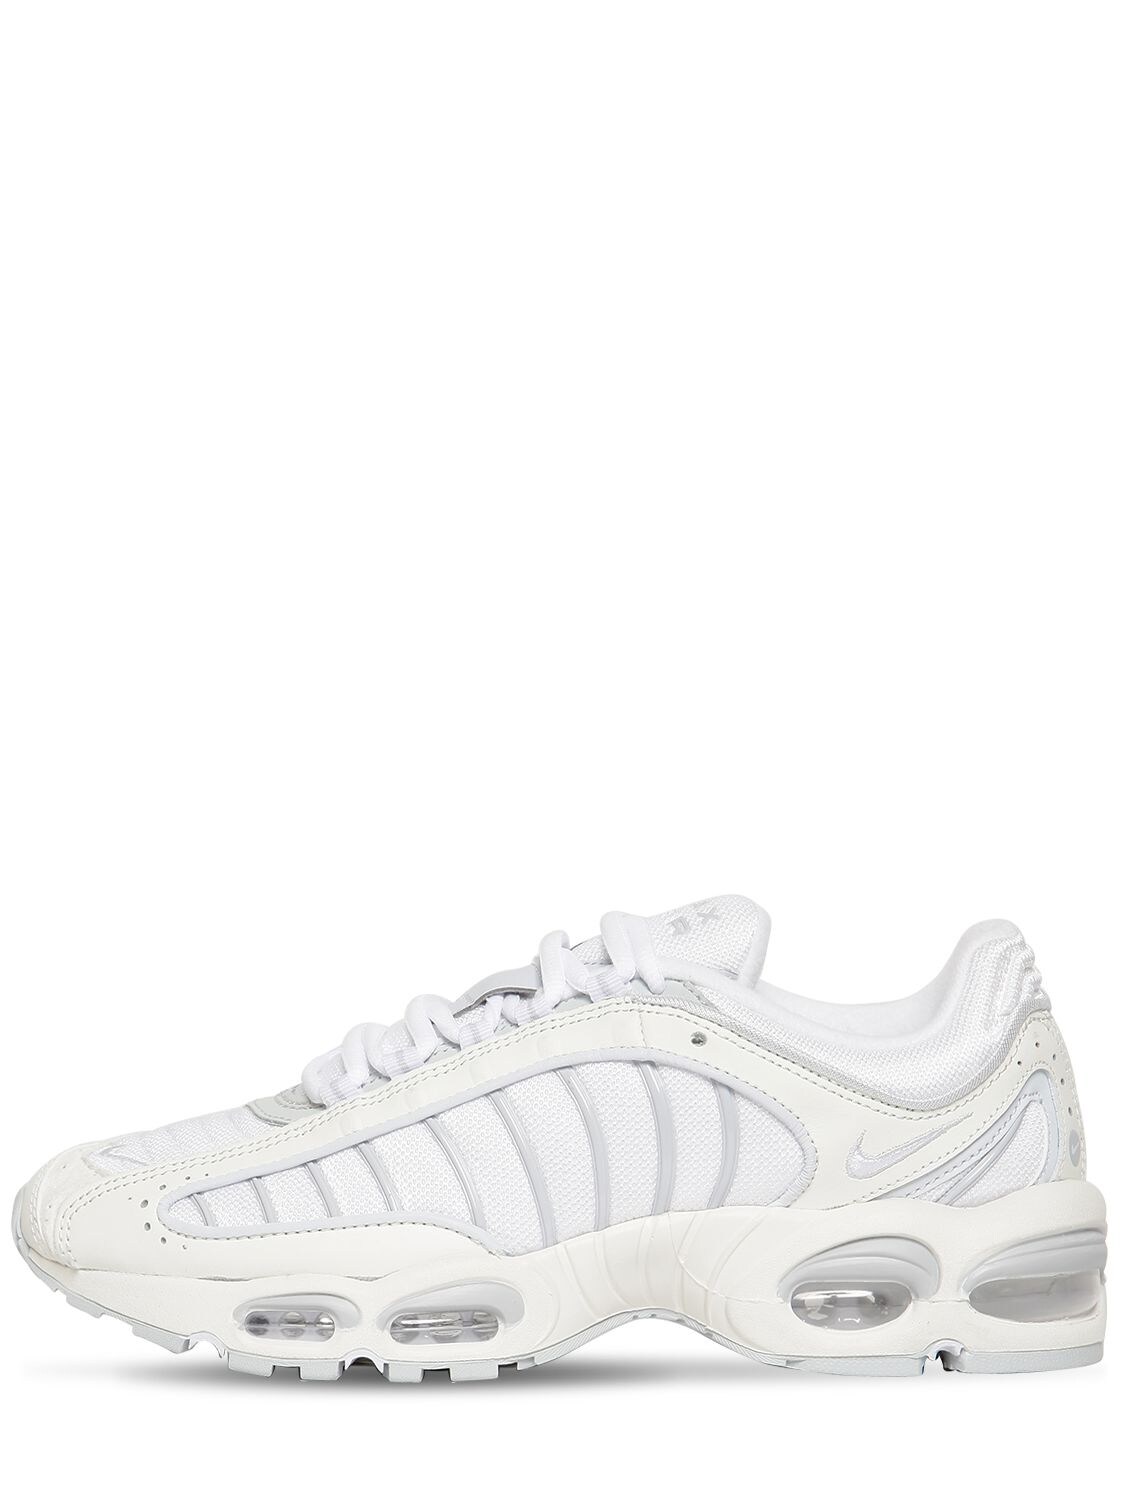 Nike Air Max Tailwind Iv Trainers In White